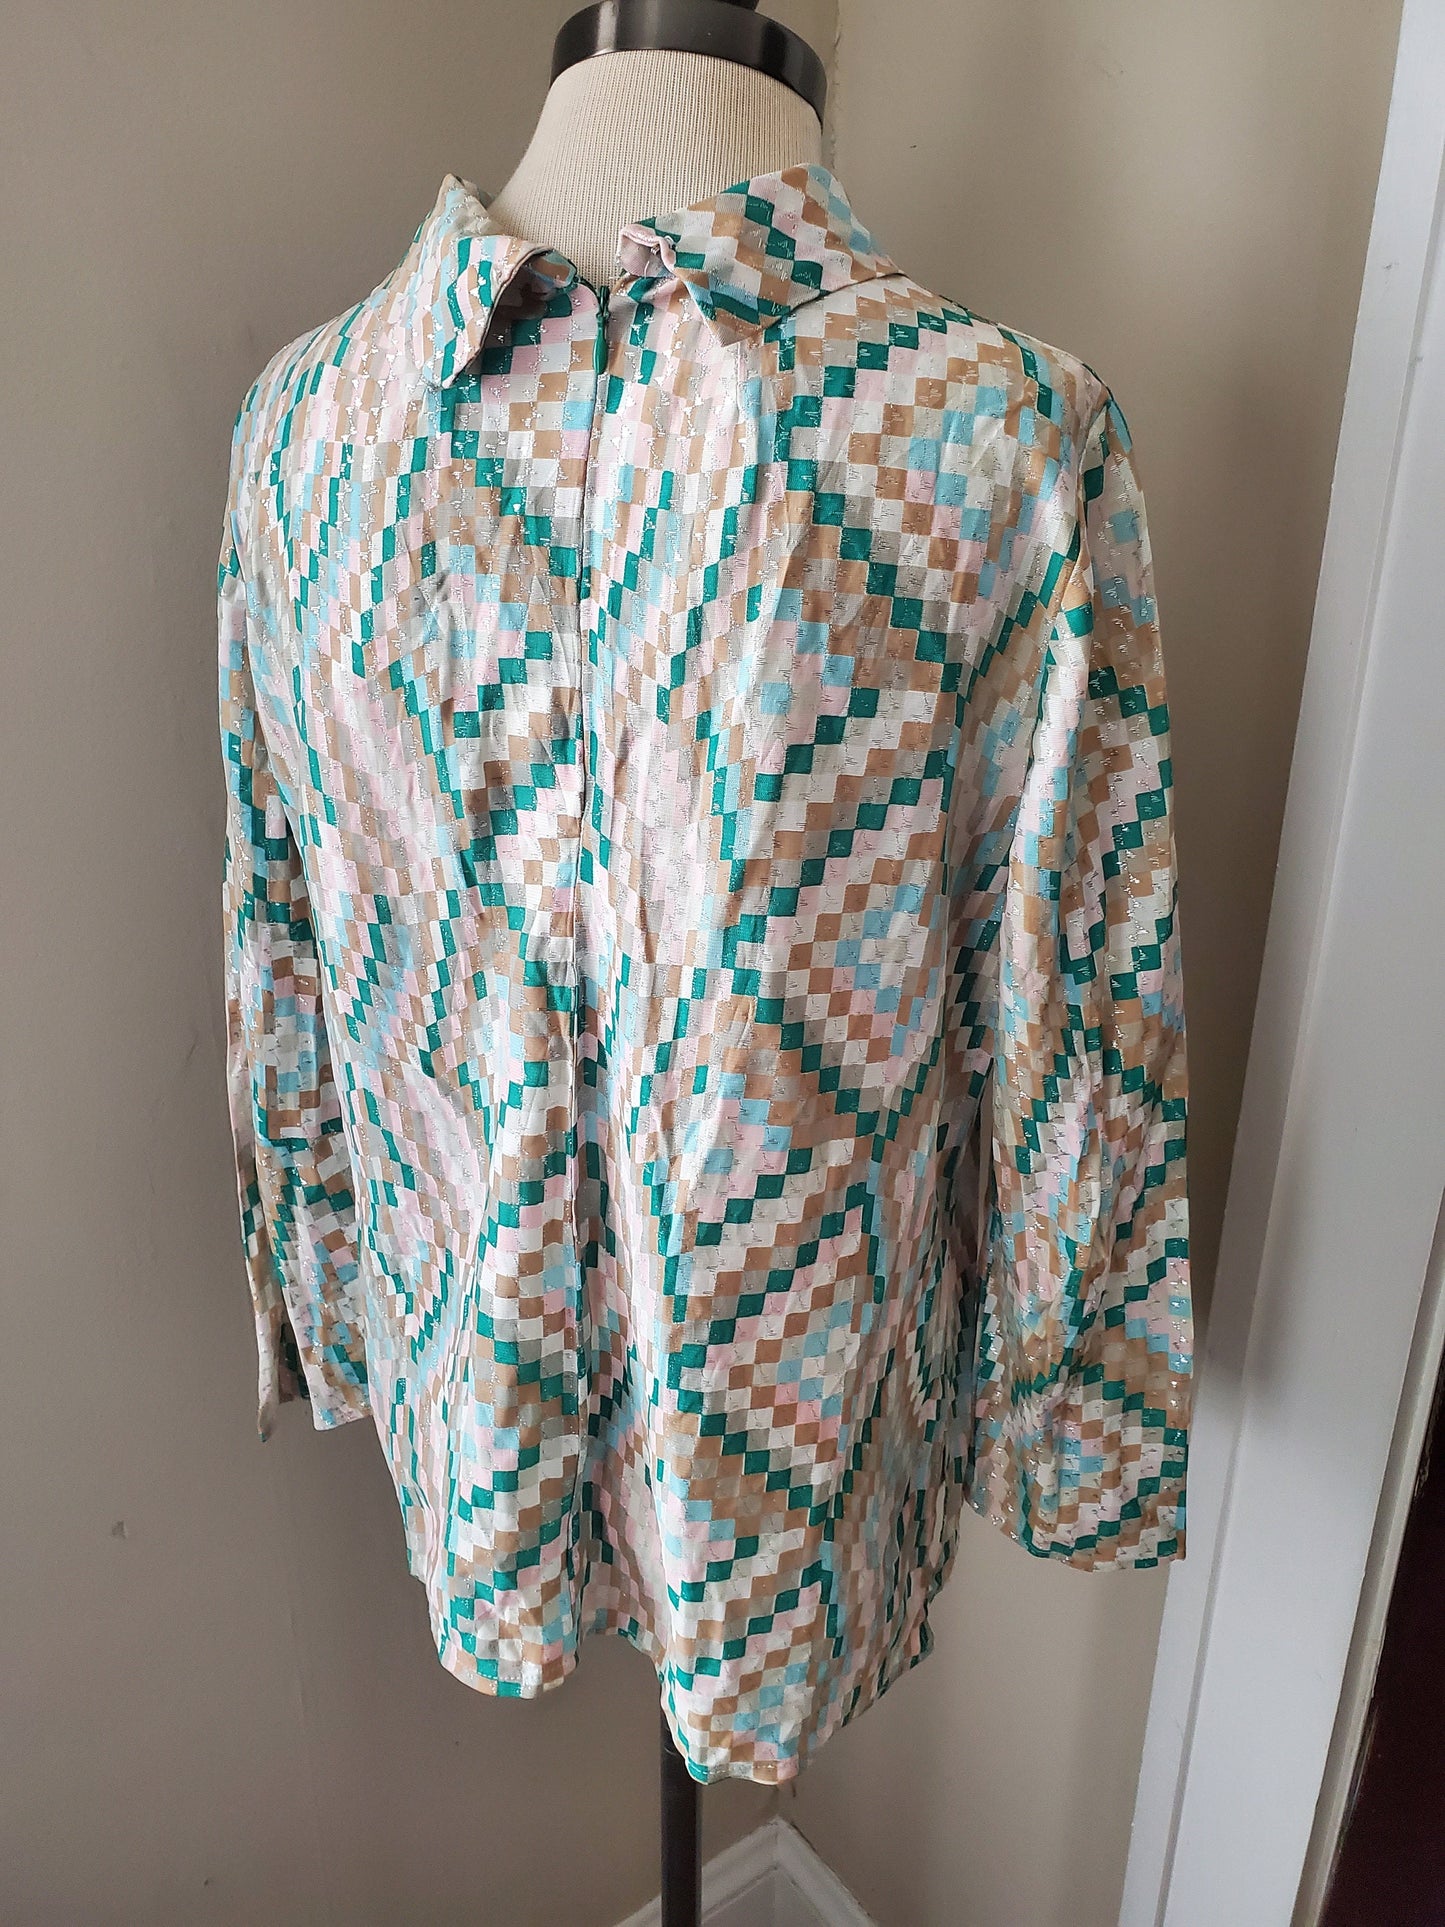 Vintage Long Sleeve Geometric Print Blouse with Shimmer